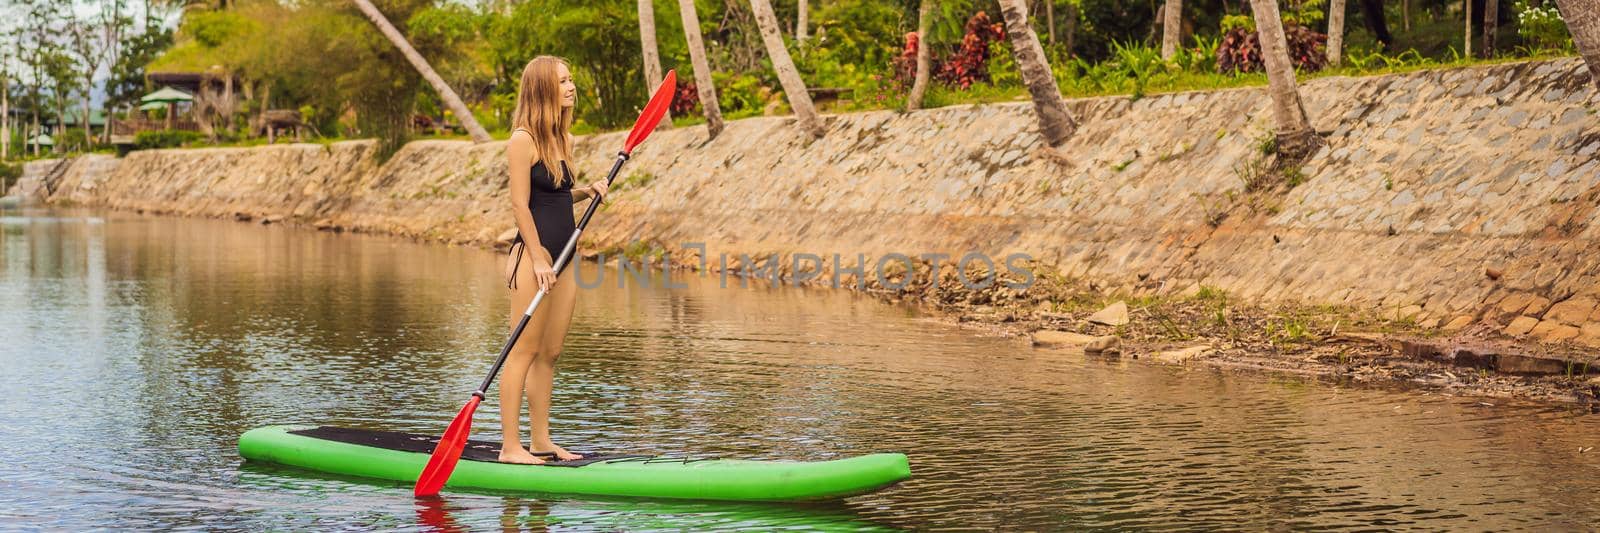 SUP Stand up paddle board woman paddle boarding on lake standing happy on paddleboard on blue water. Action Shot of Young Woman on Paddle Board BANNER, LONG FORMAT by galitskaya